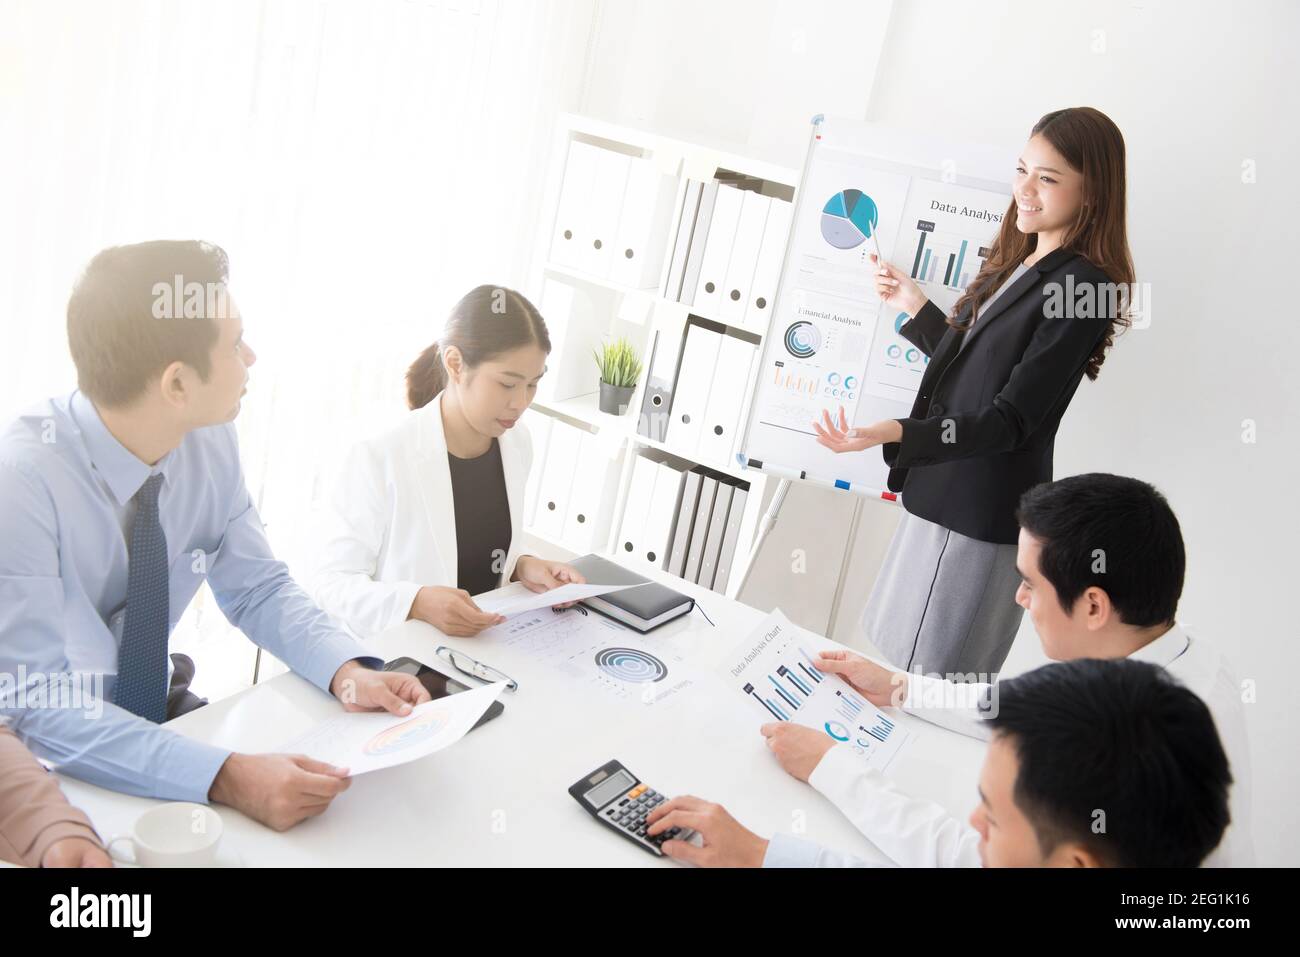 Asian business woman presenting her work in the meeting Stock Photo